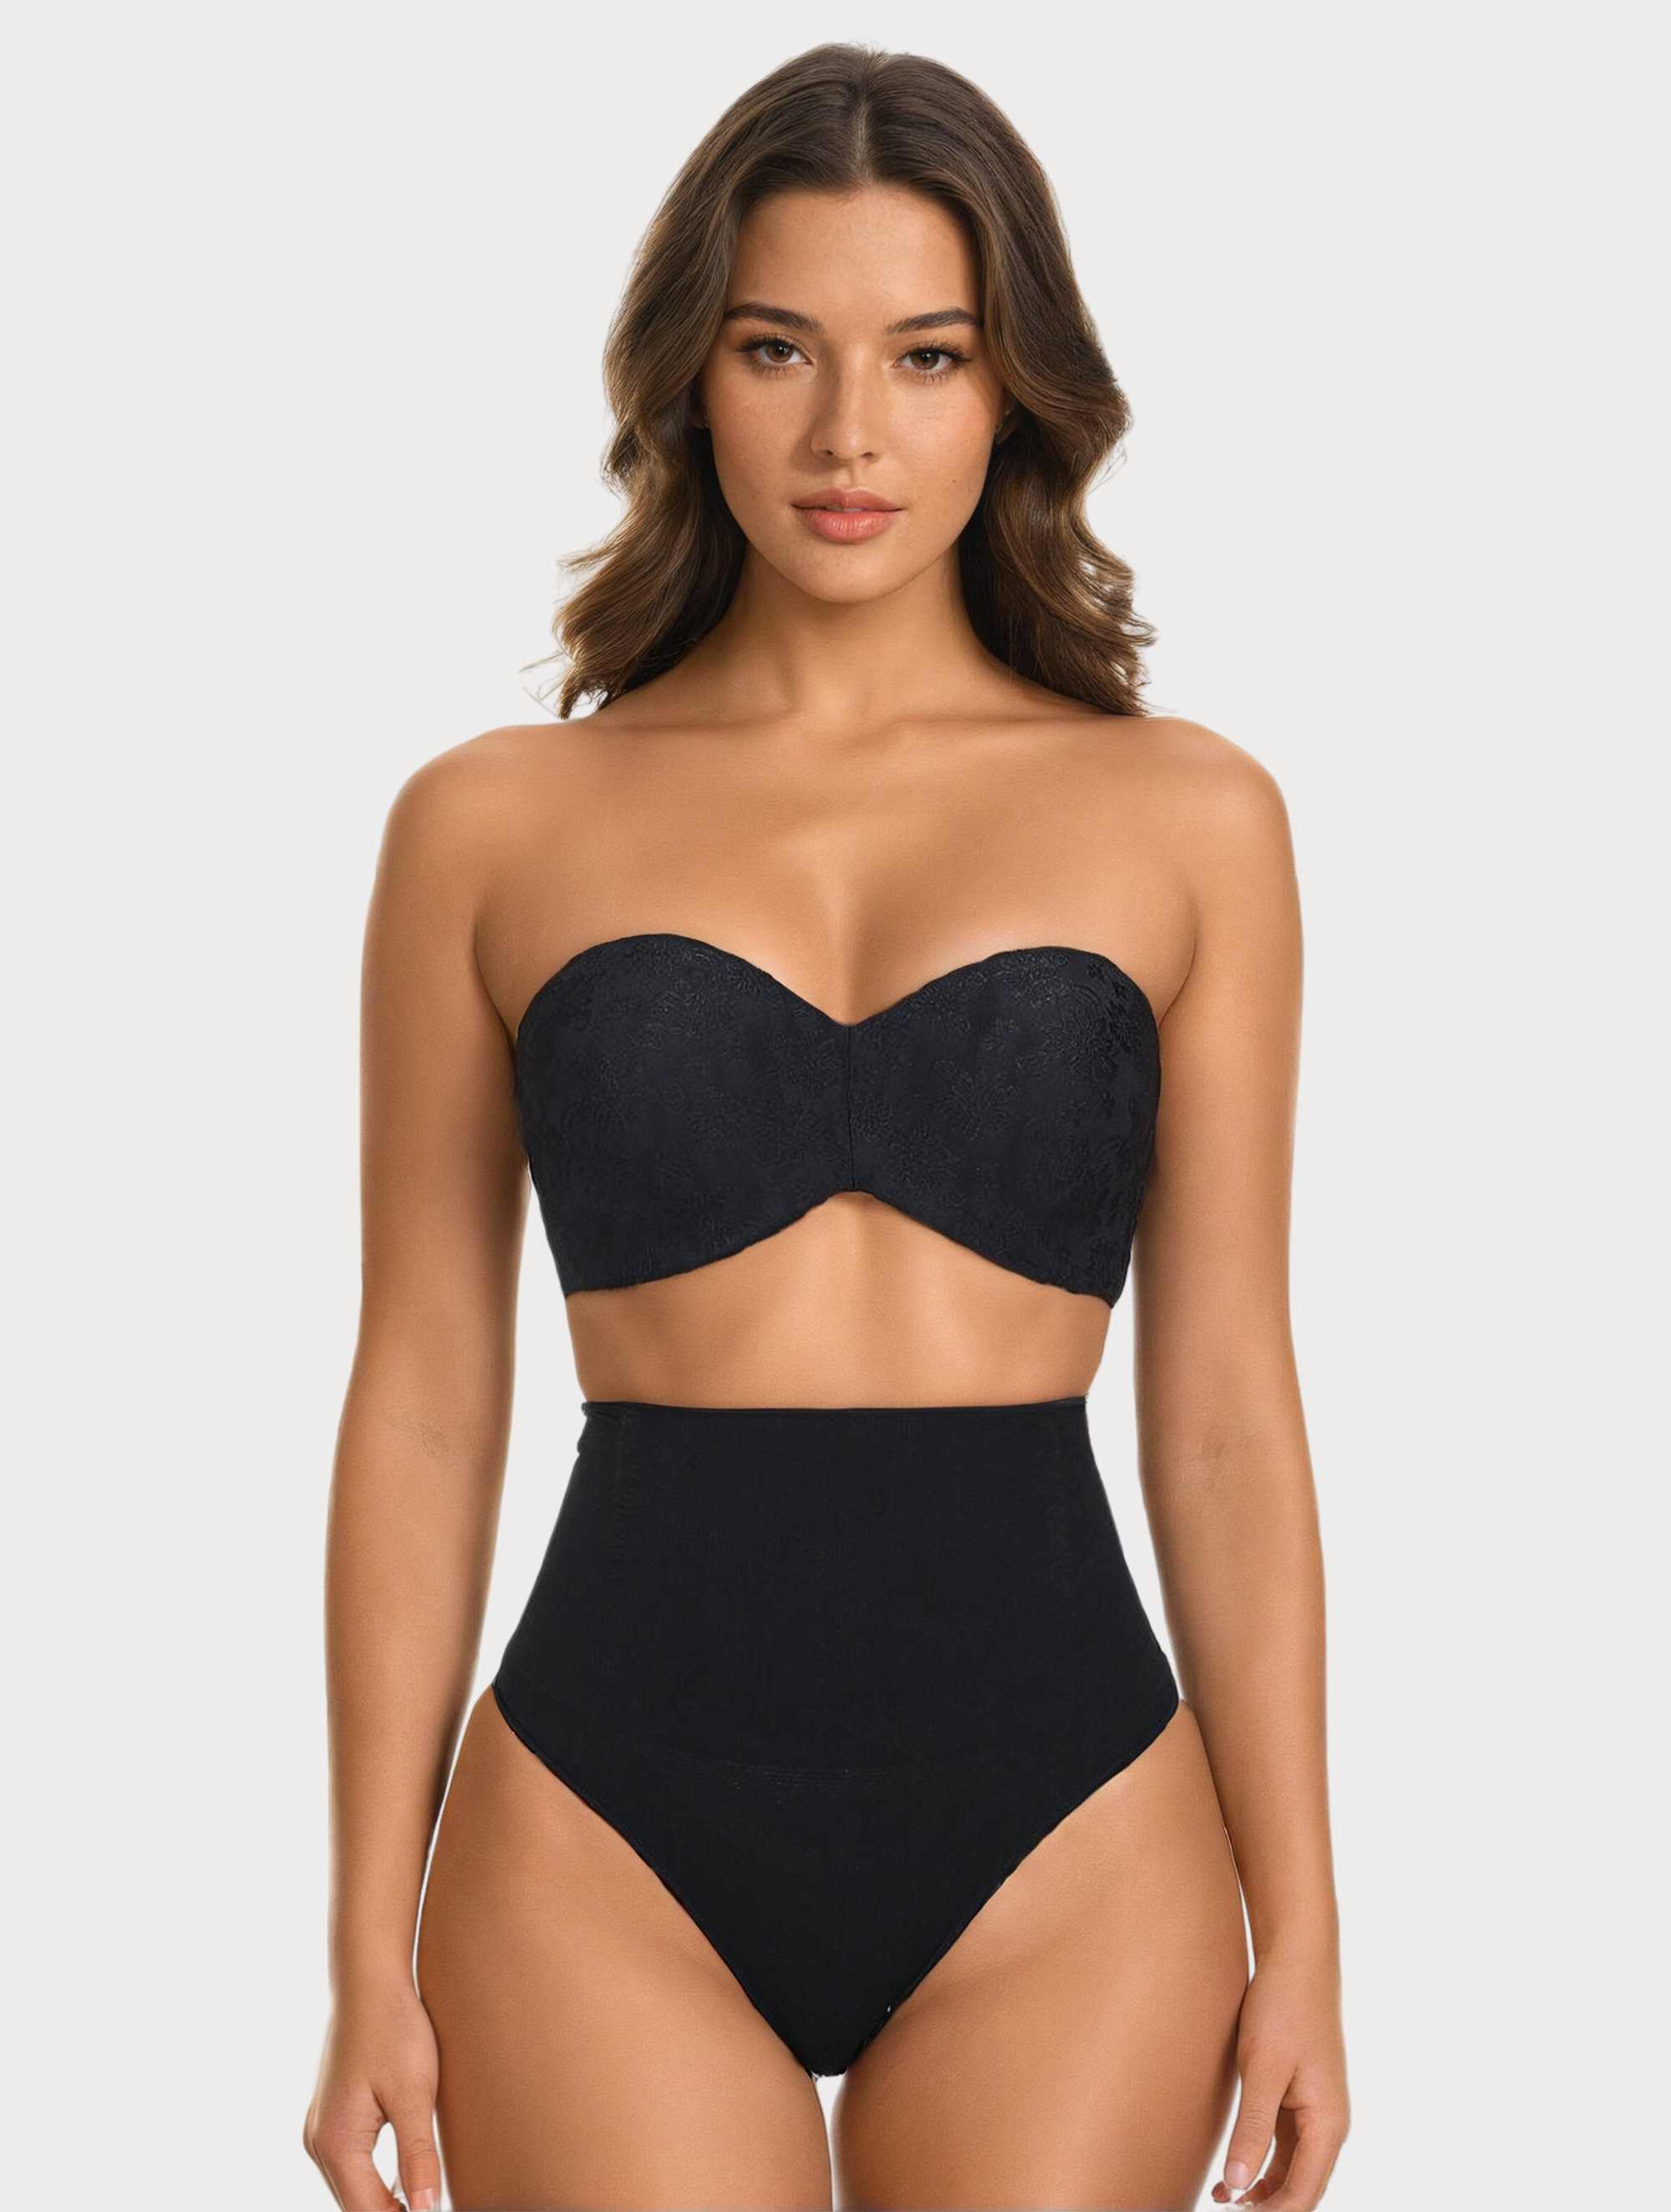 Womens Shapewear Clothes at Best Prices in Sri Lanka